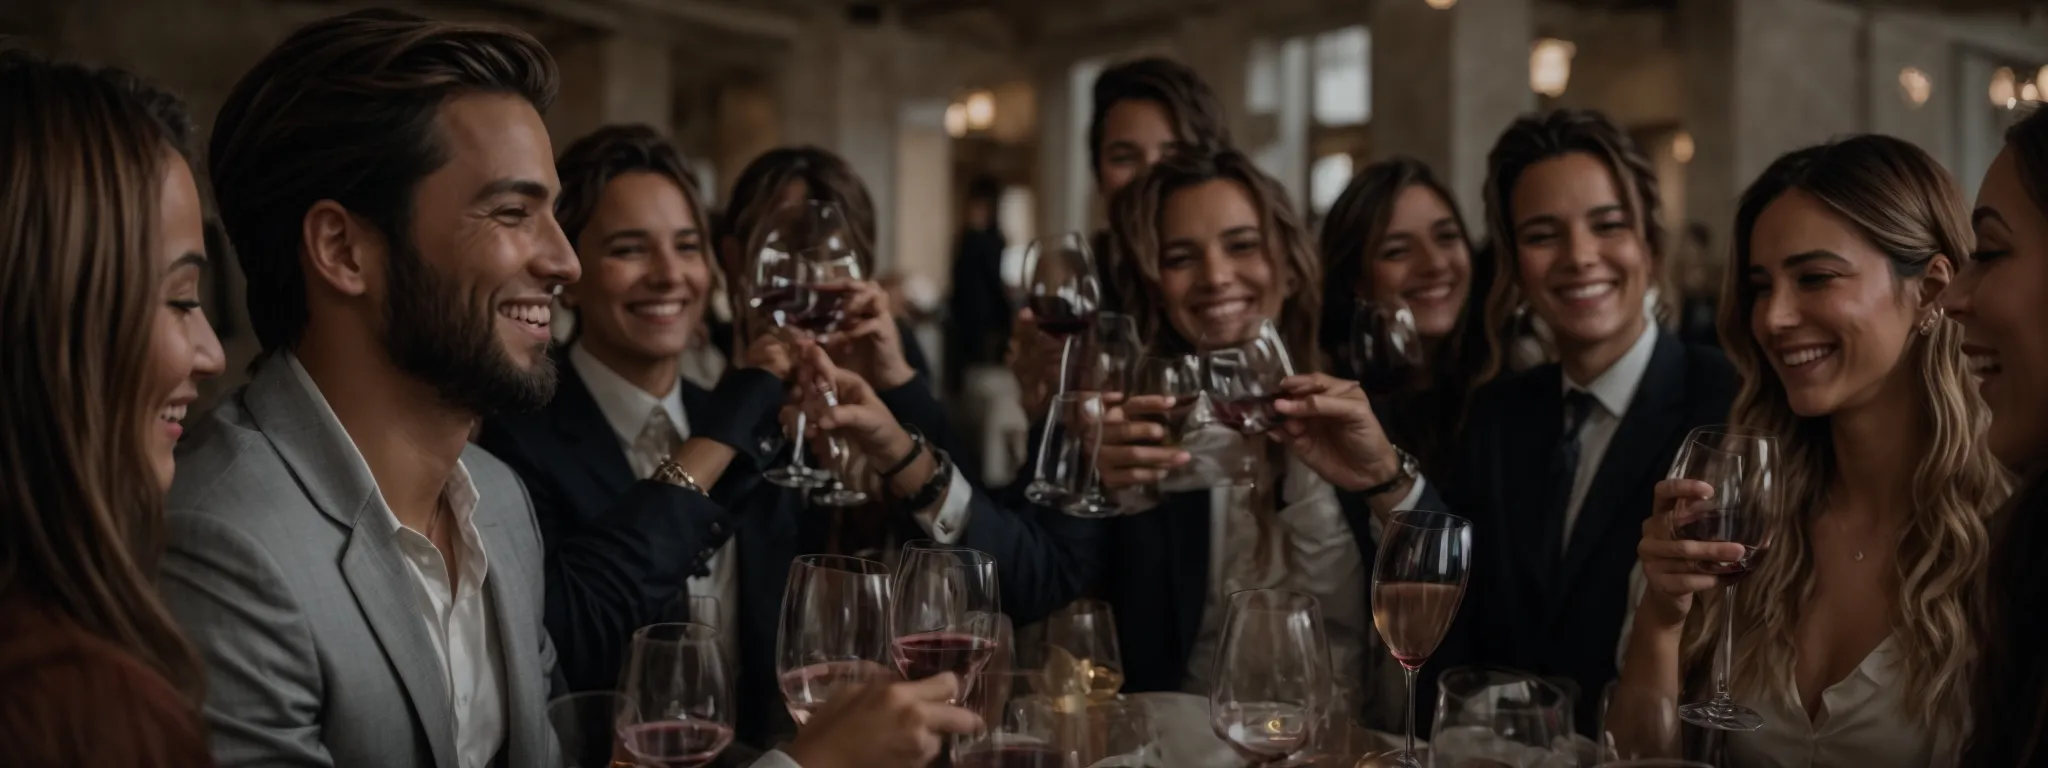 a group of delighted friends raising their glasses for a toast in an exclusive wine tasting event. 